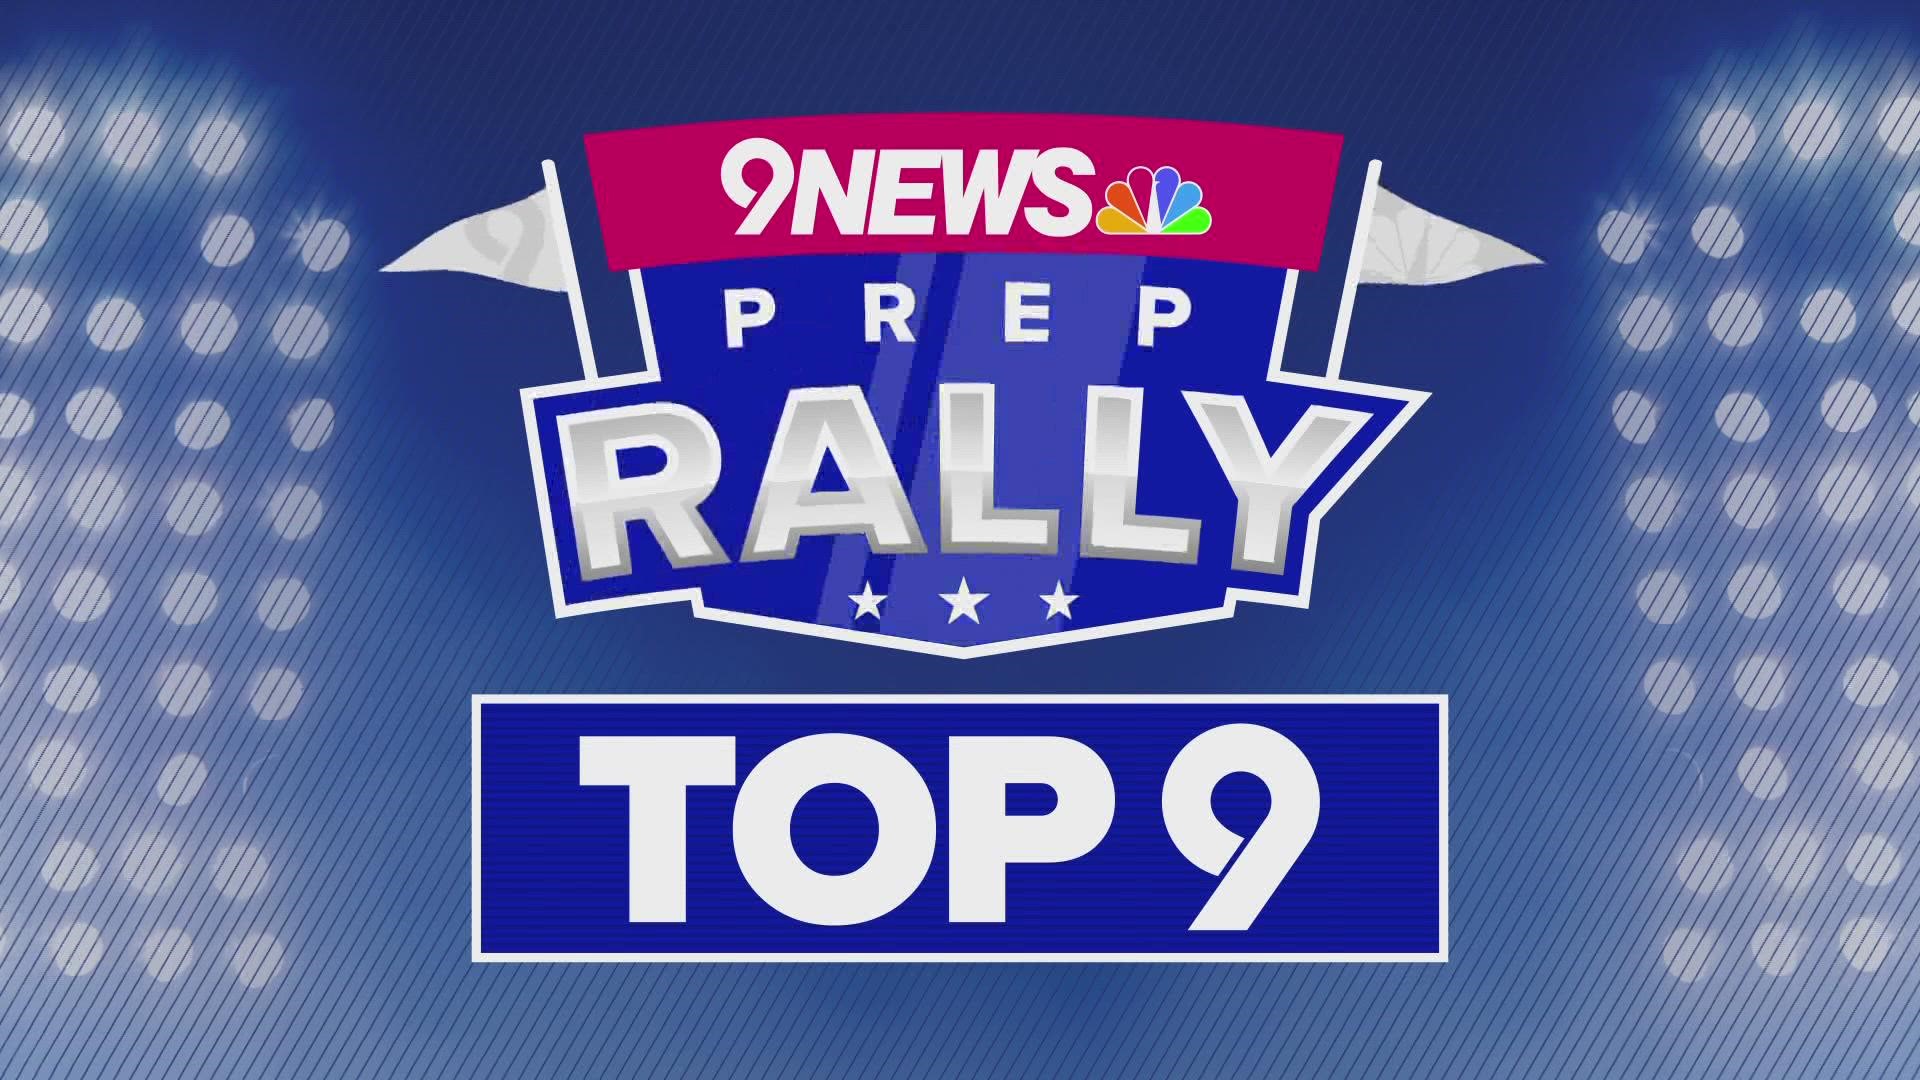 Catch up on the latest high school sports news with the Sunday morning Prep Rally!